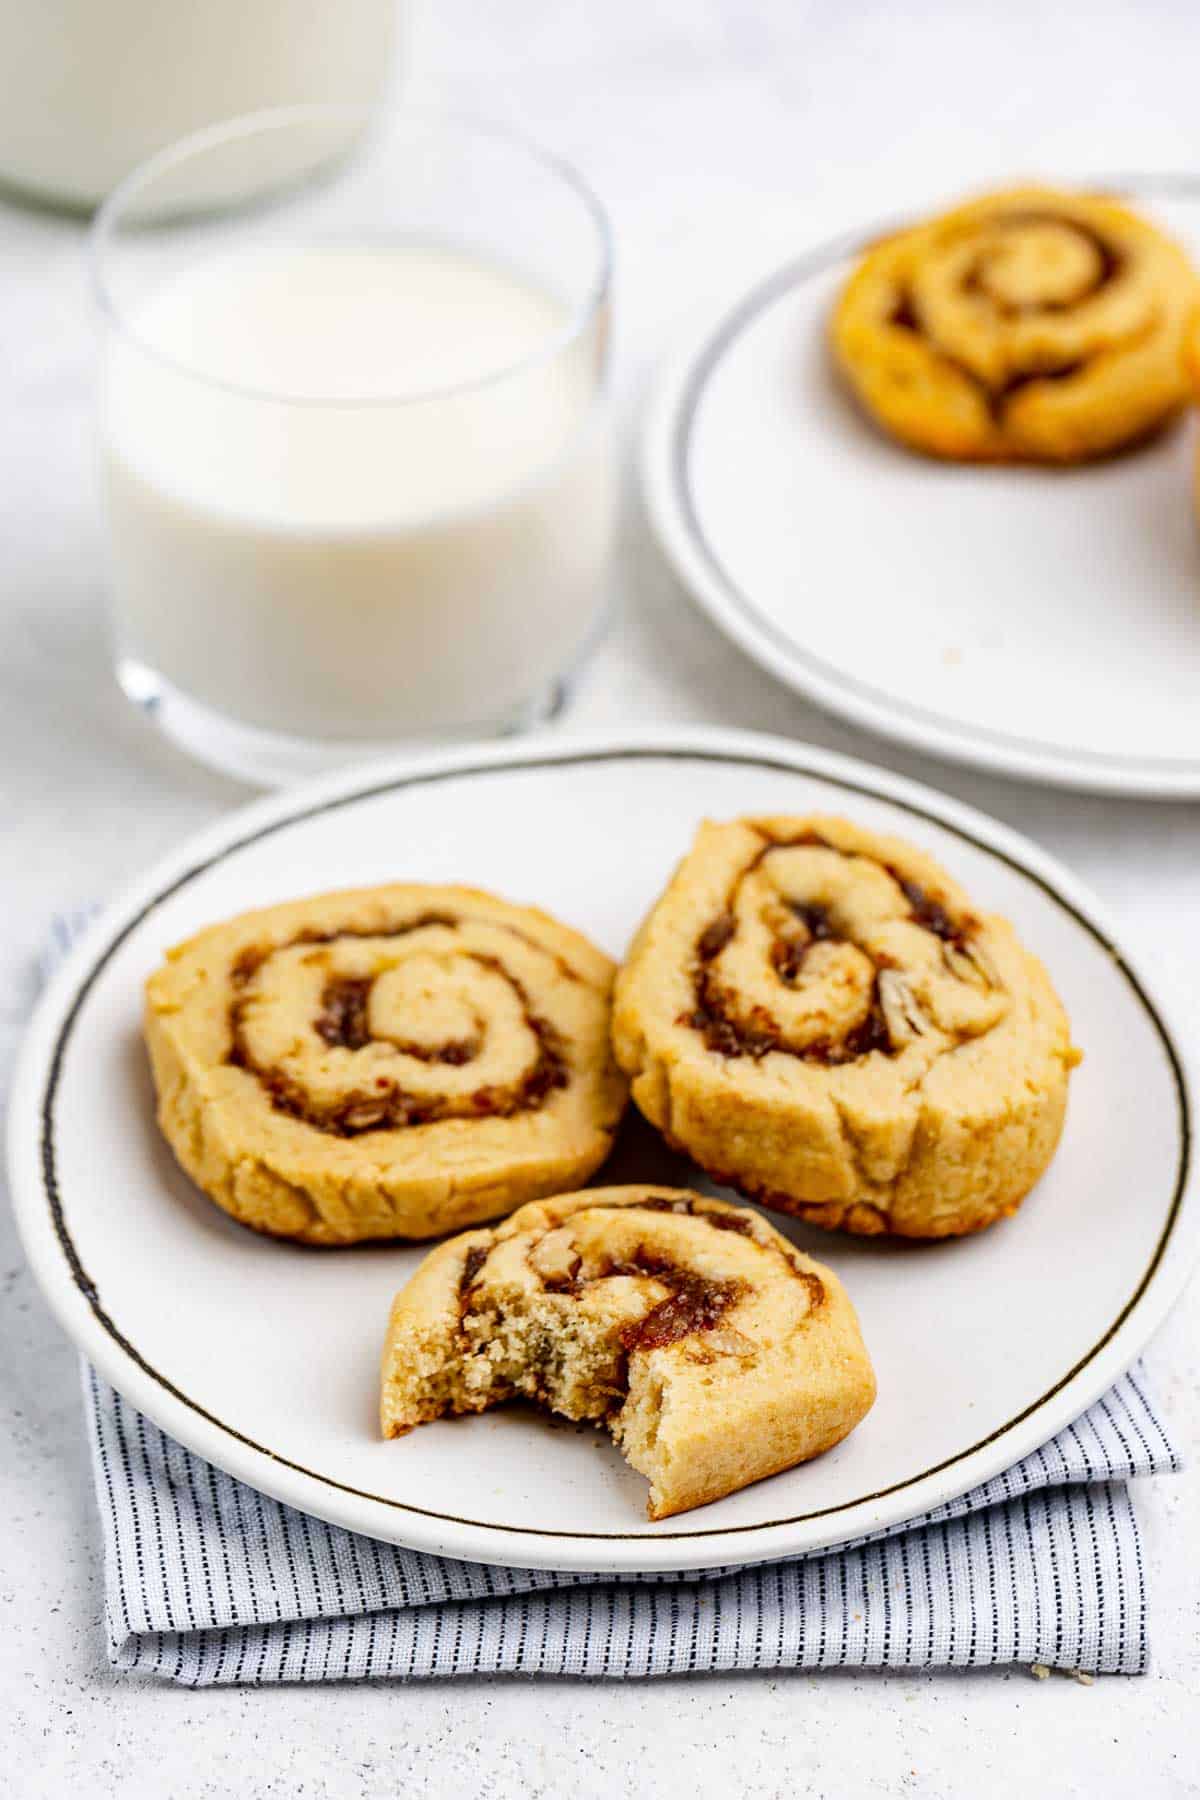 Date pinwheel cookies on a plate and a glass of milk.